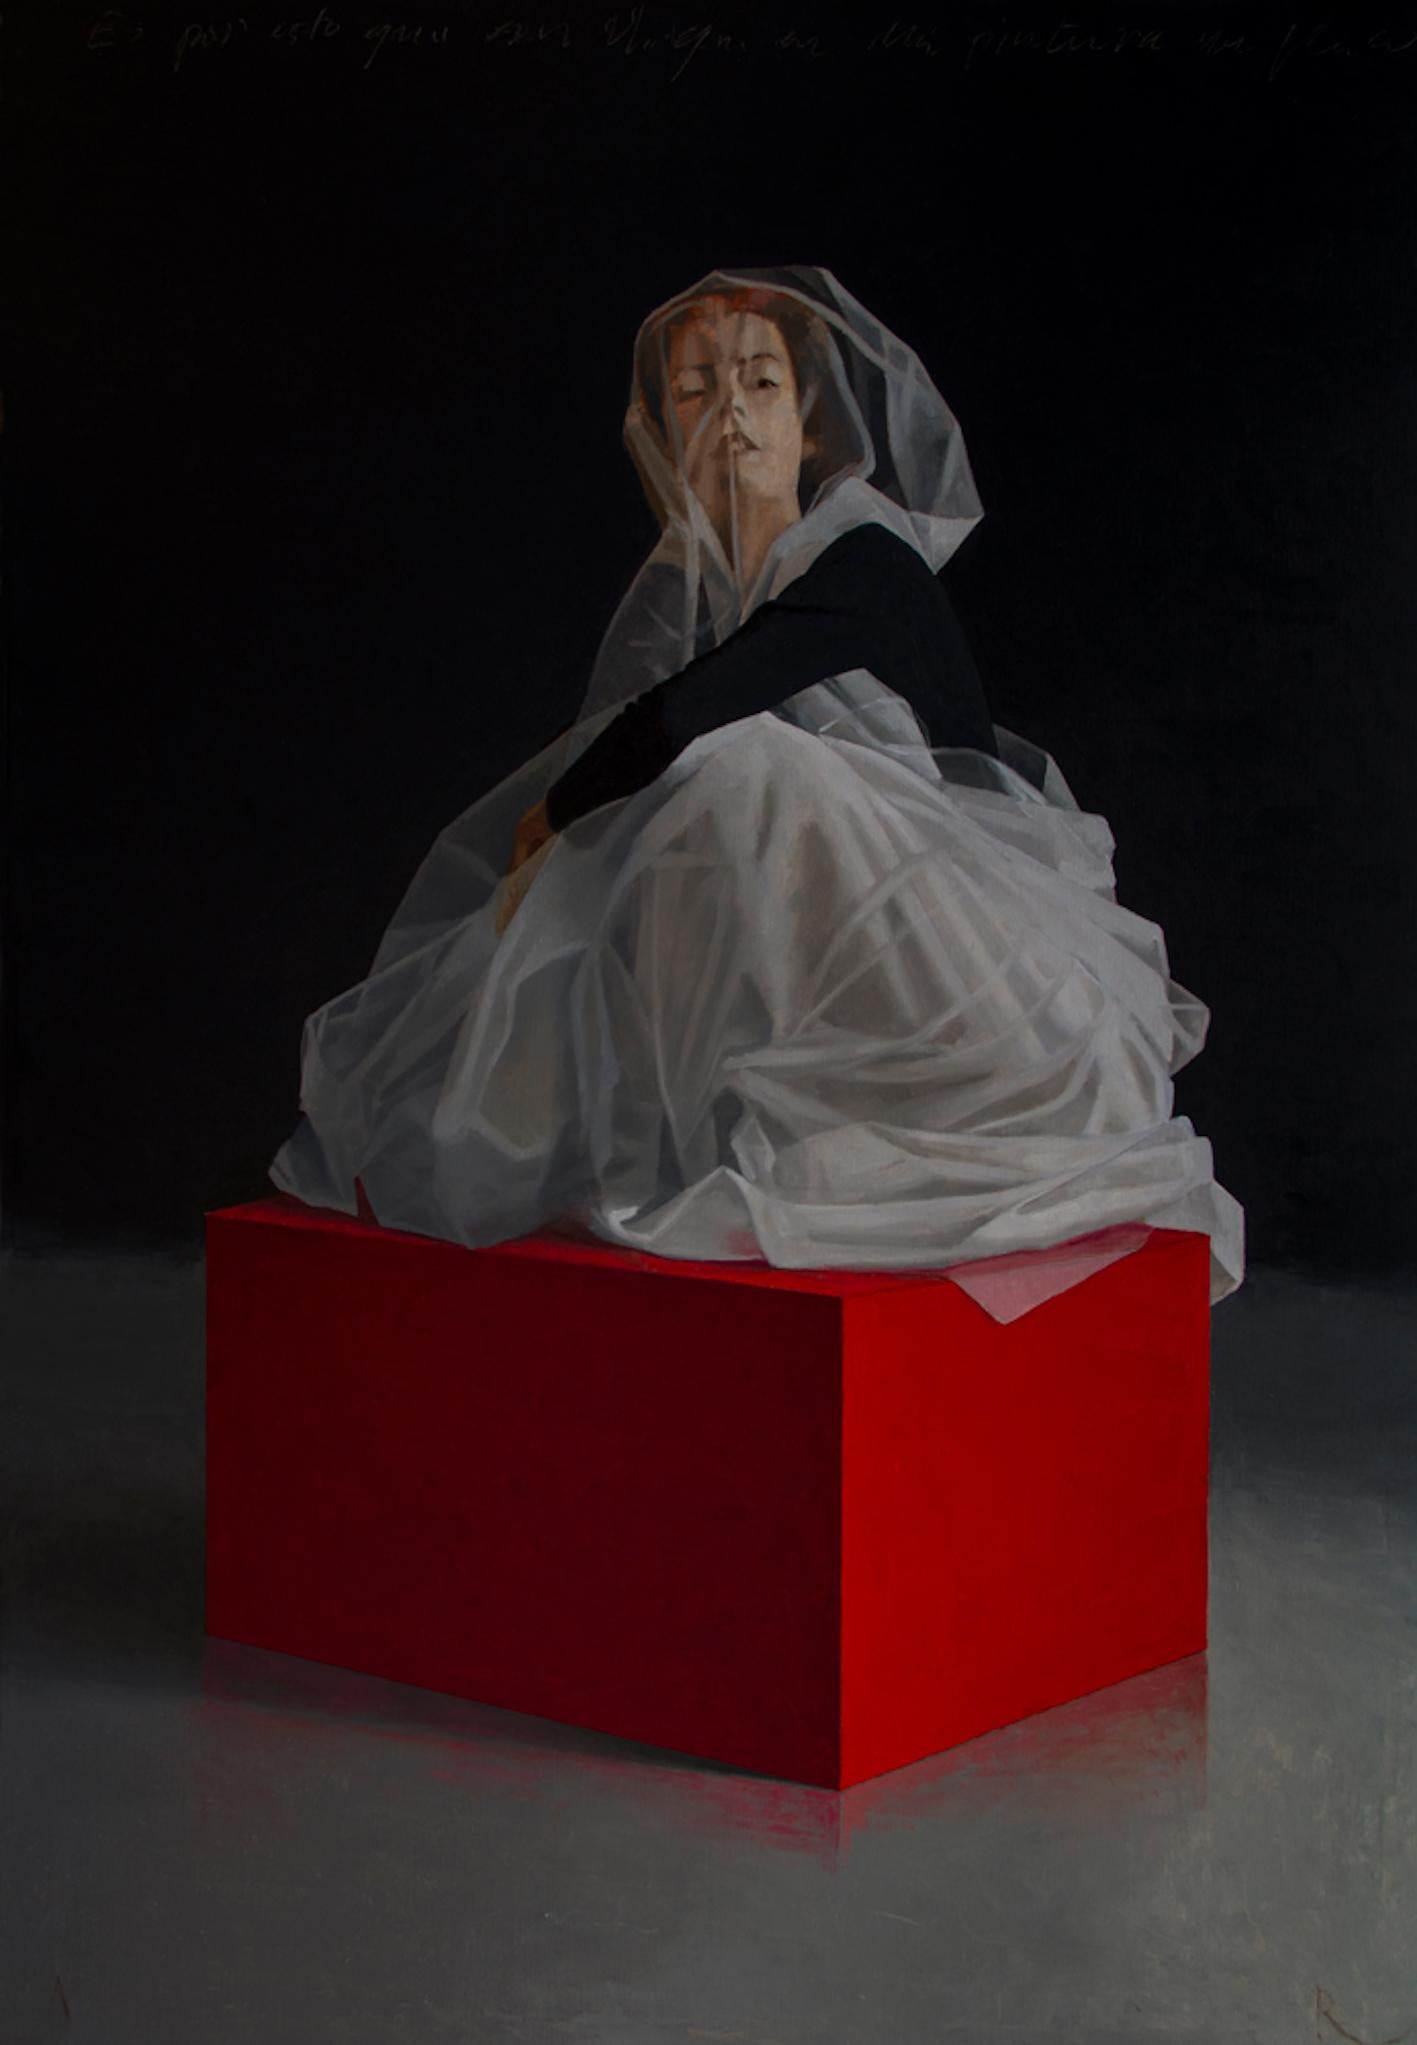 Adolfo Ramon Figurative Painting - Woman on Shelf - 21st Century Contemporary Oil Painting of a Woman in a Dress